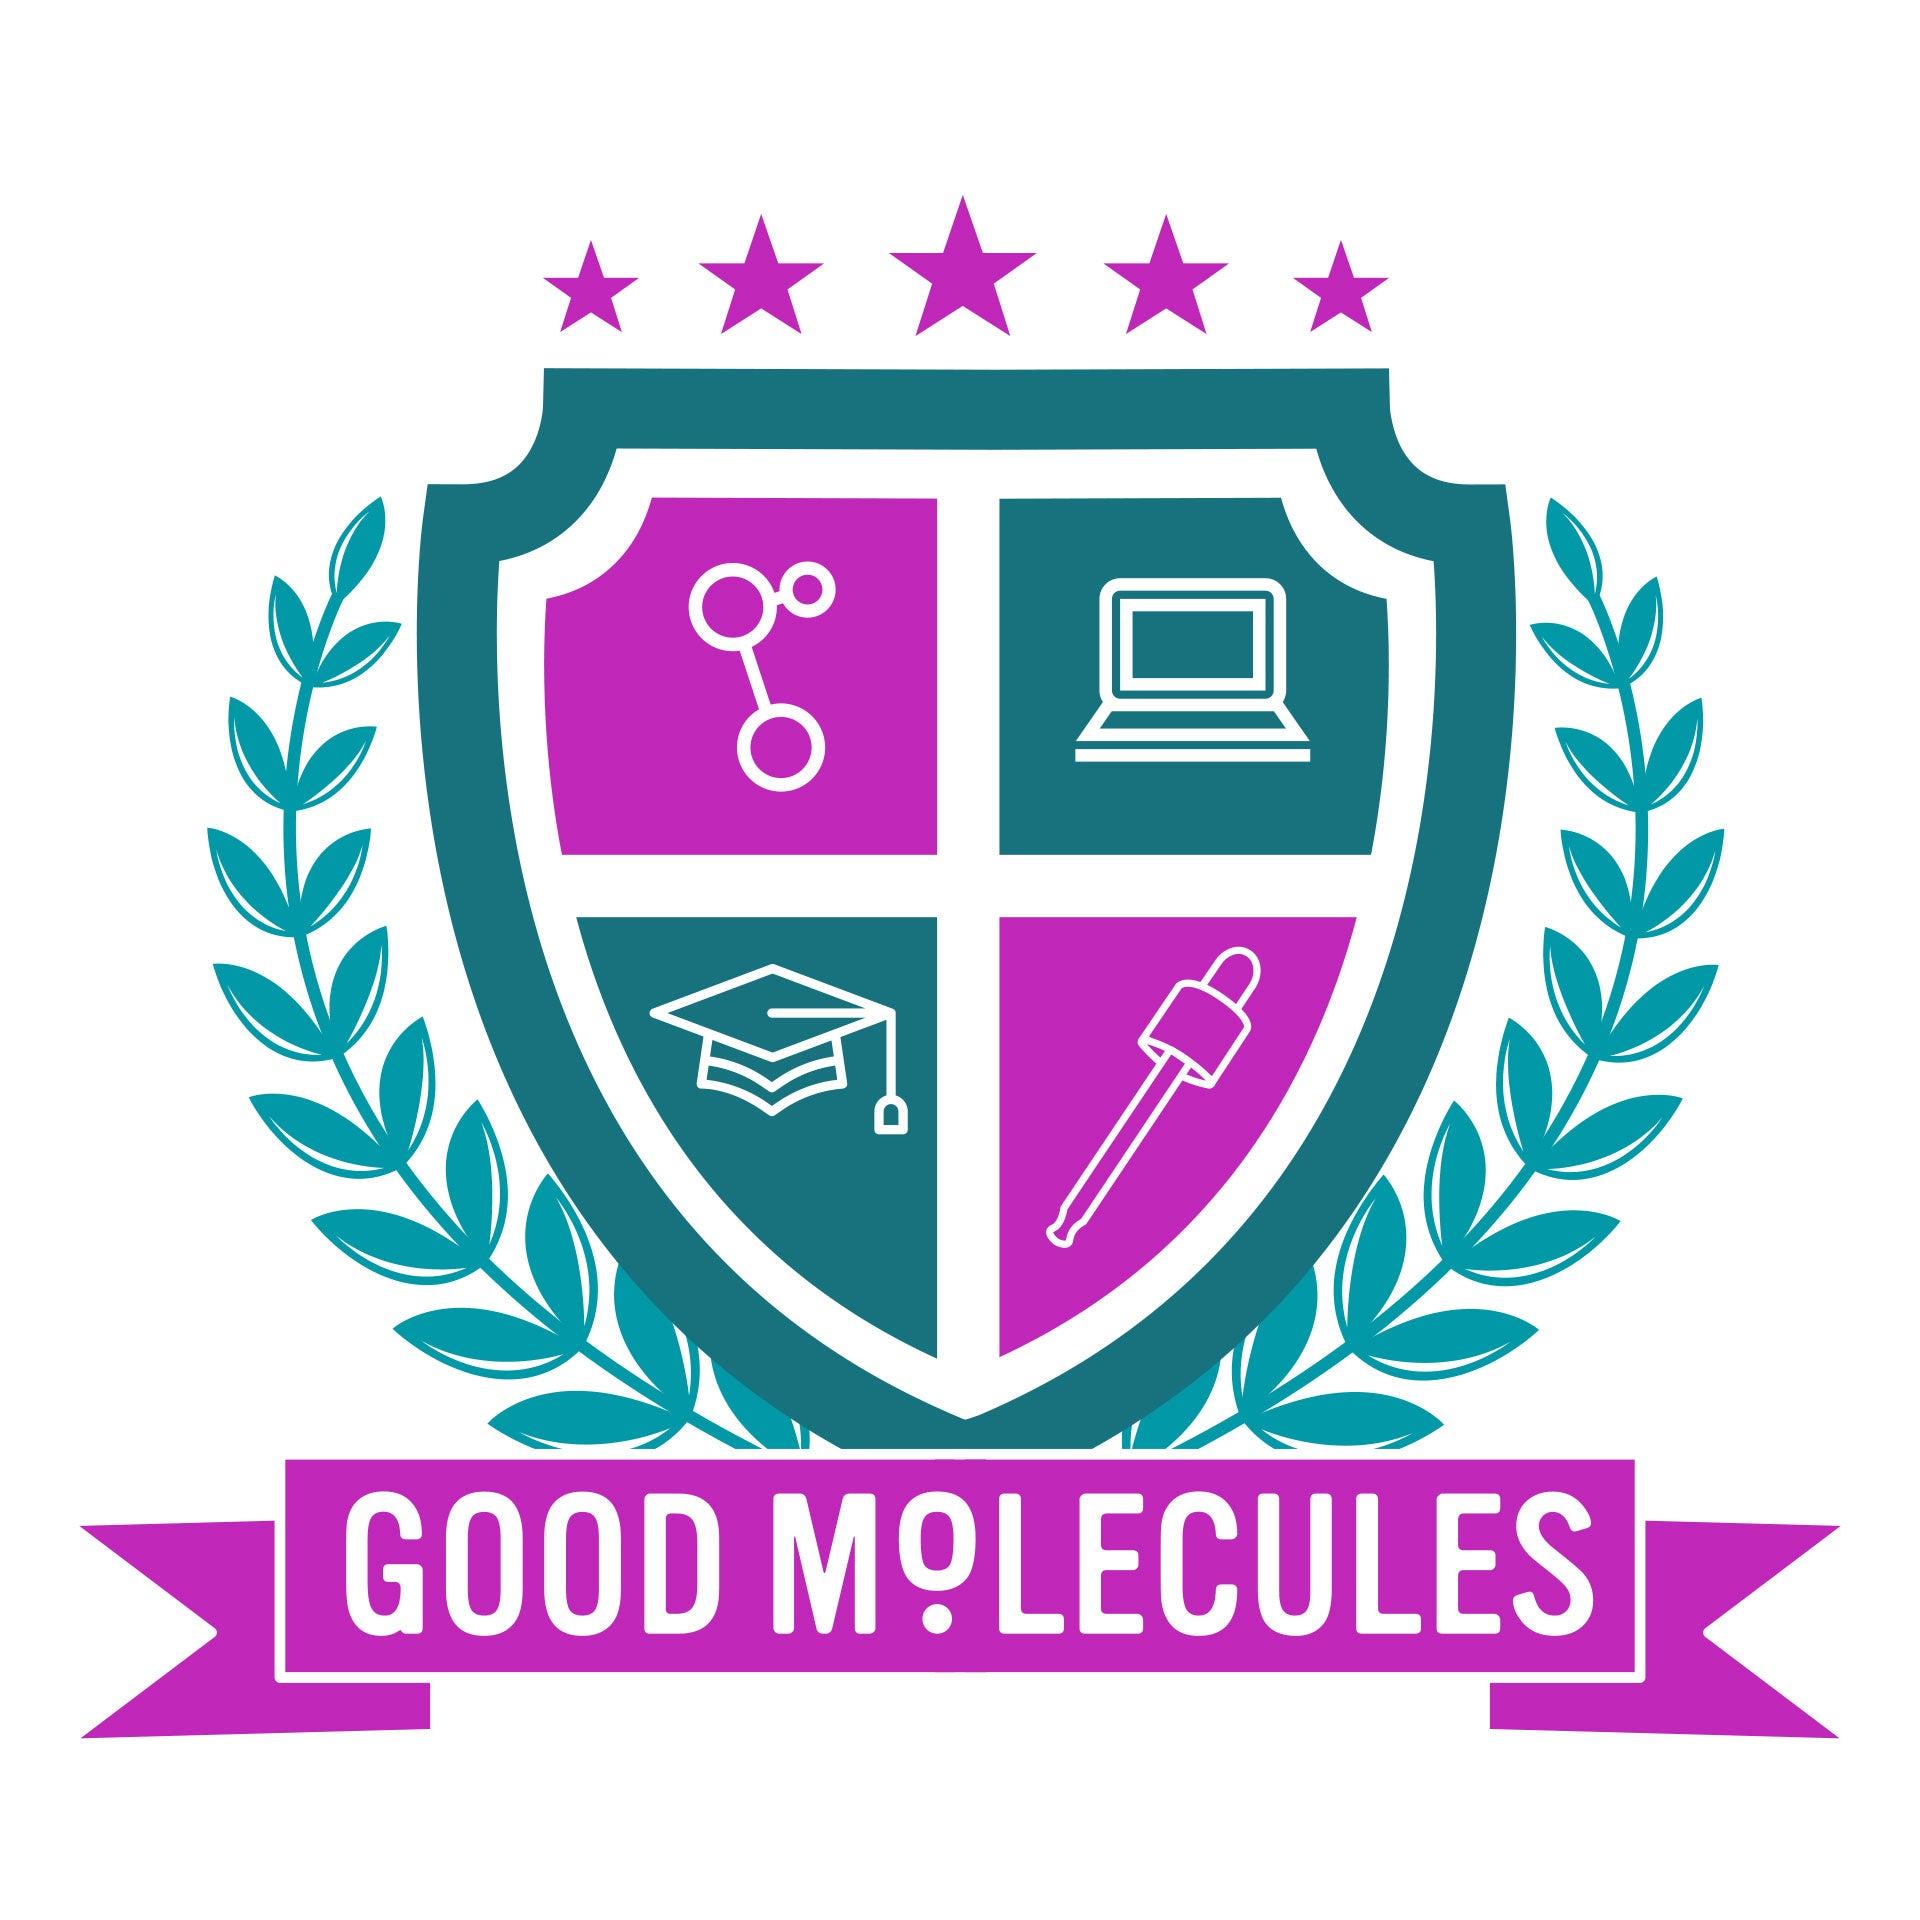 Good Molecules is coming to Temple University!